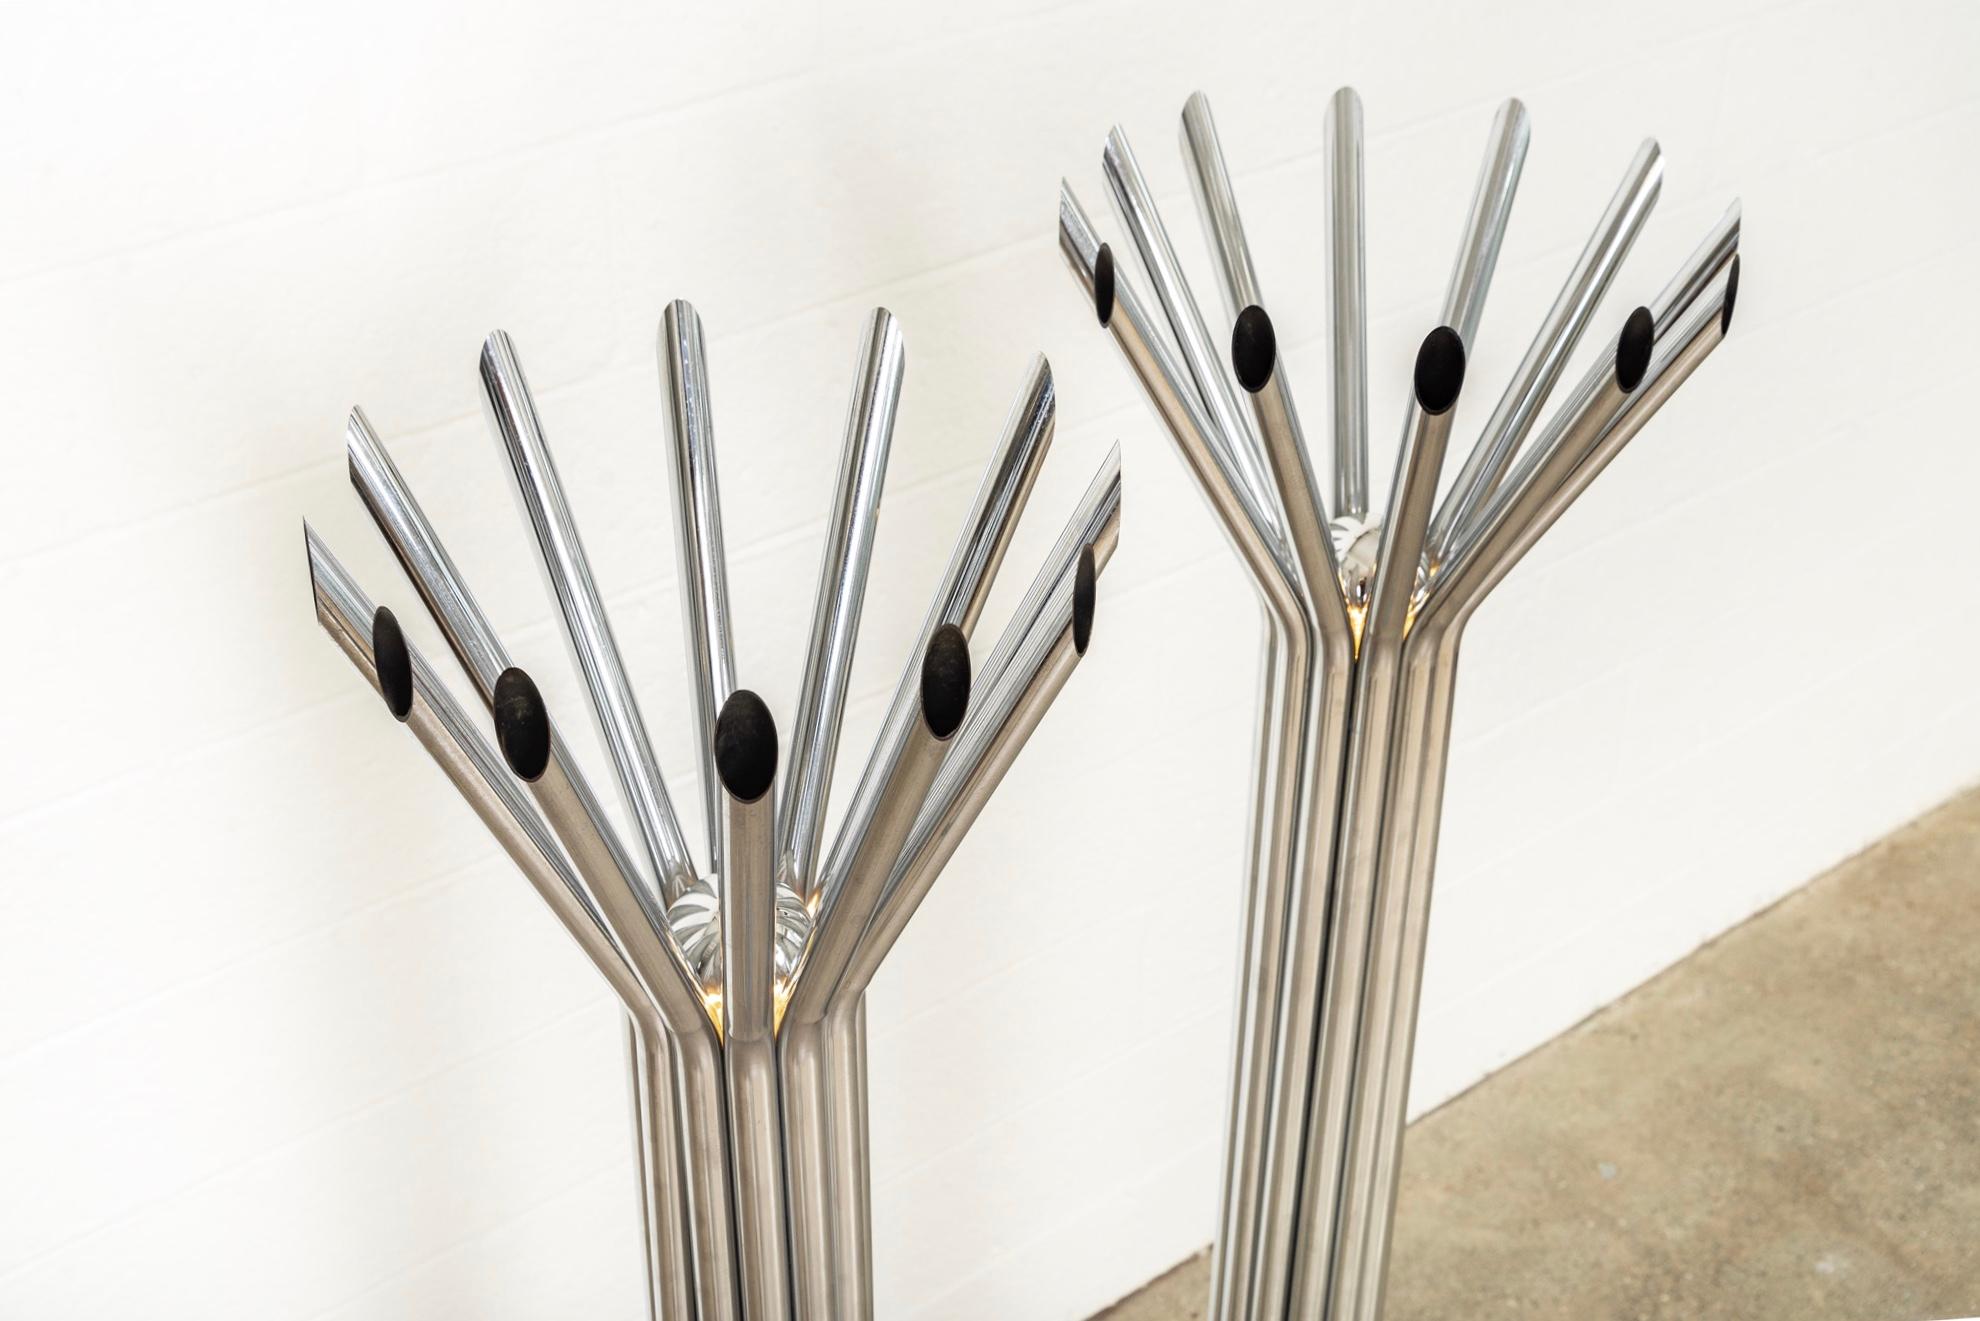 Steel Midcentury Chrome Floor Lamp by George Kovacs 'Attr.' Matching Pair Available For Sale